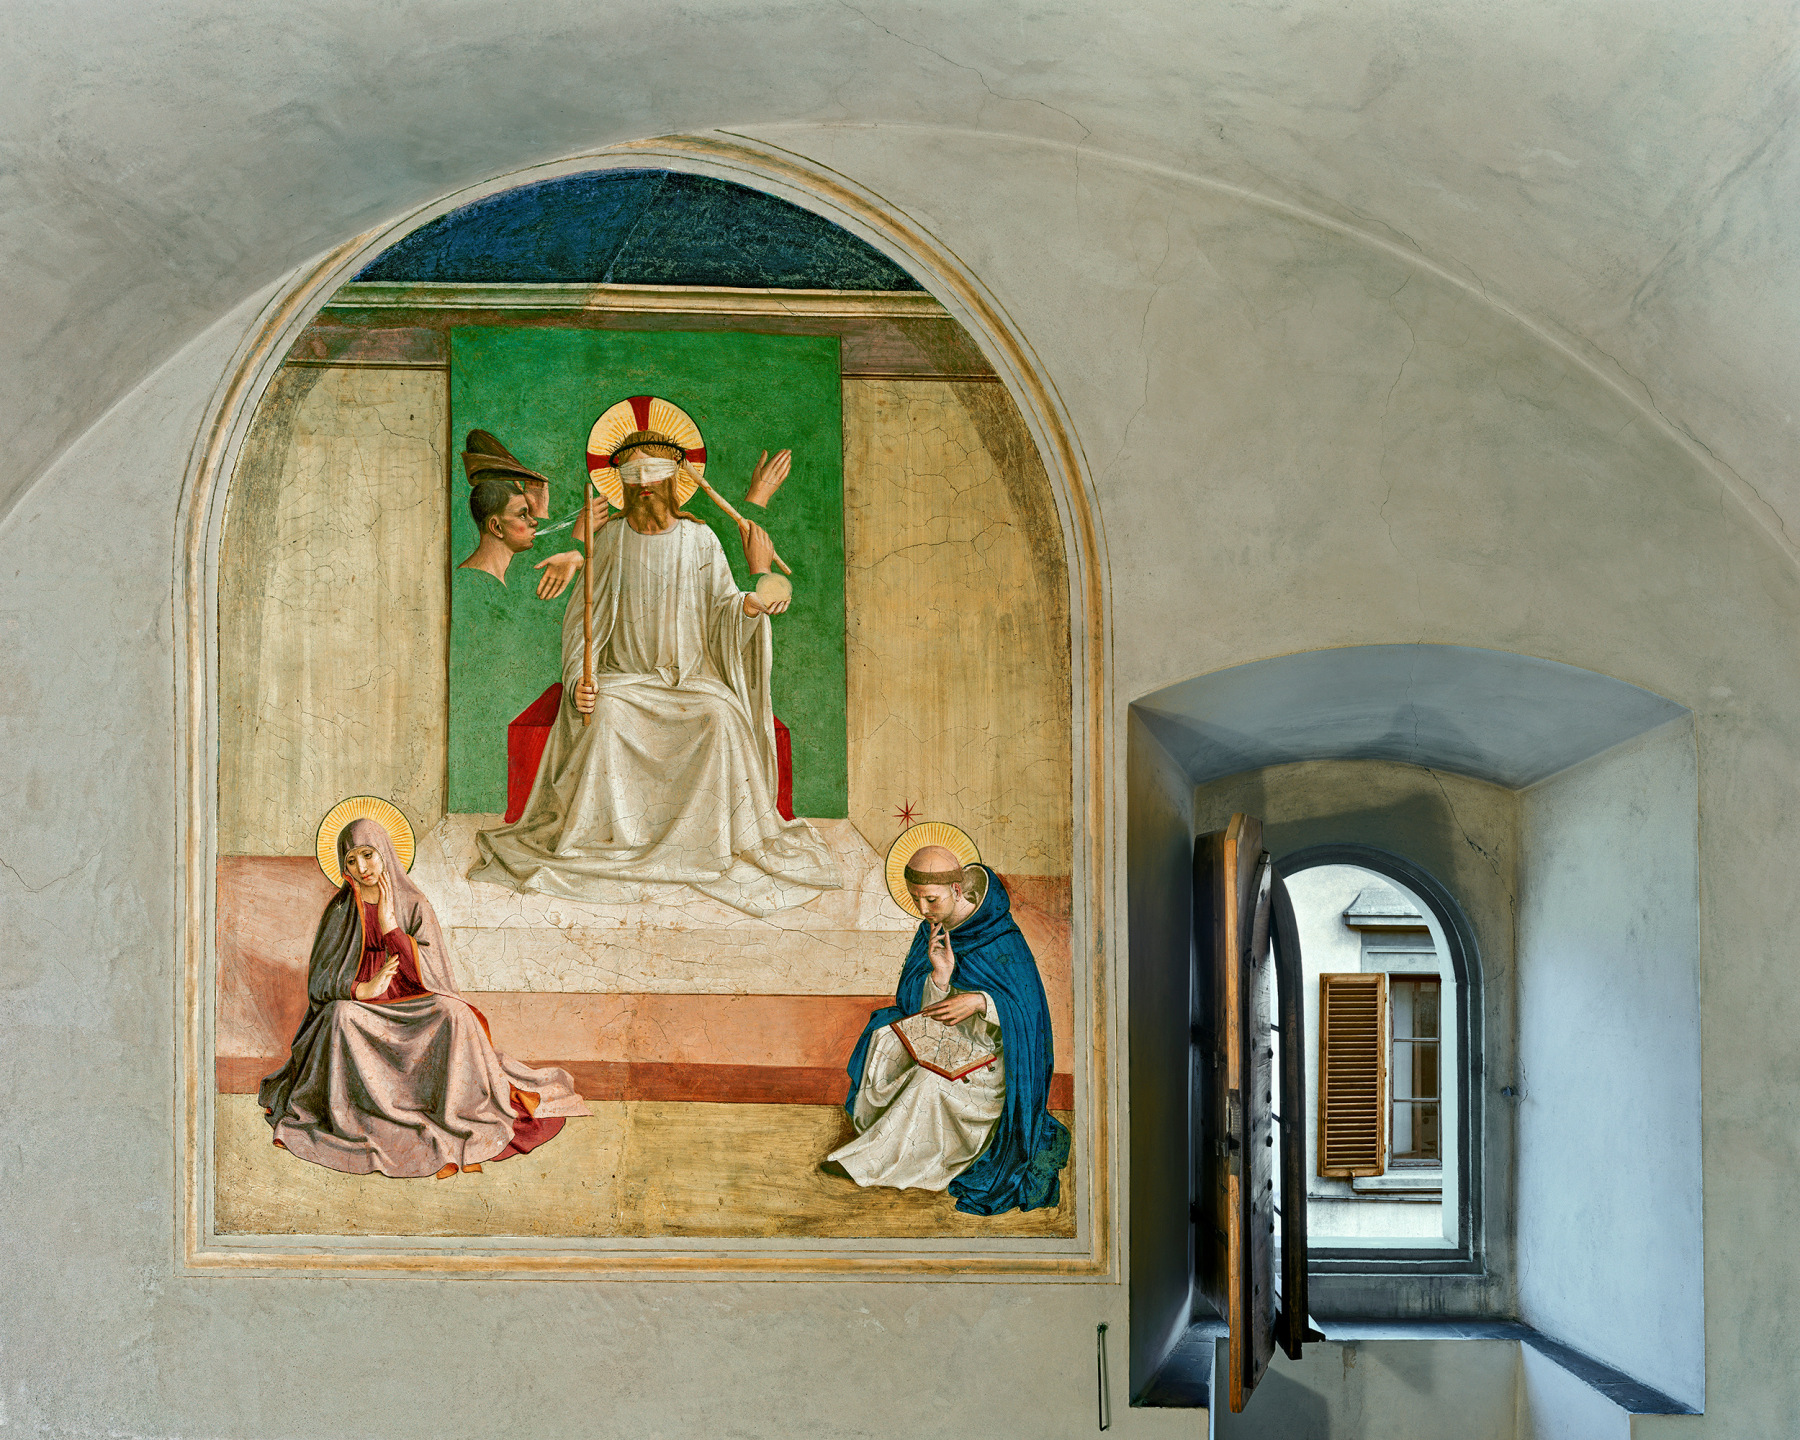 Robert Polidori&amp;nbsp;The Mocking of Christ by Fra Angelico, Cell 7, Museum of San Marco Convent, Florence, Italy, 2010, archival pigment print mounted to dibond

44 x 54 inches, Edition of 5, with 2 APs &amp;copy; Robert Polidori. Image courtesy Kasmin Gallery